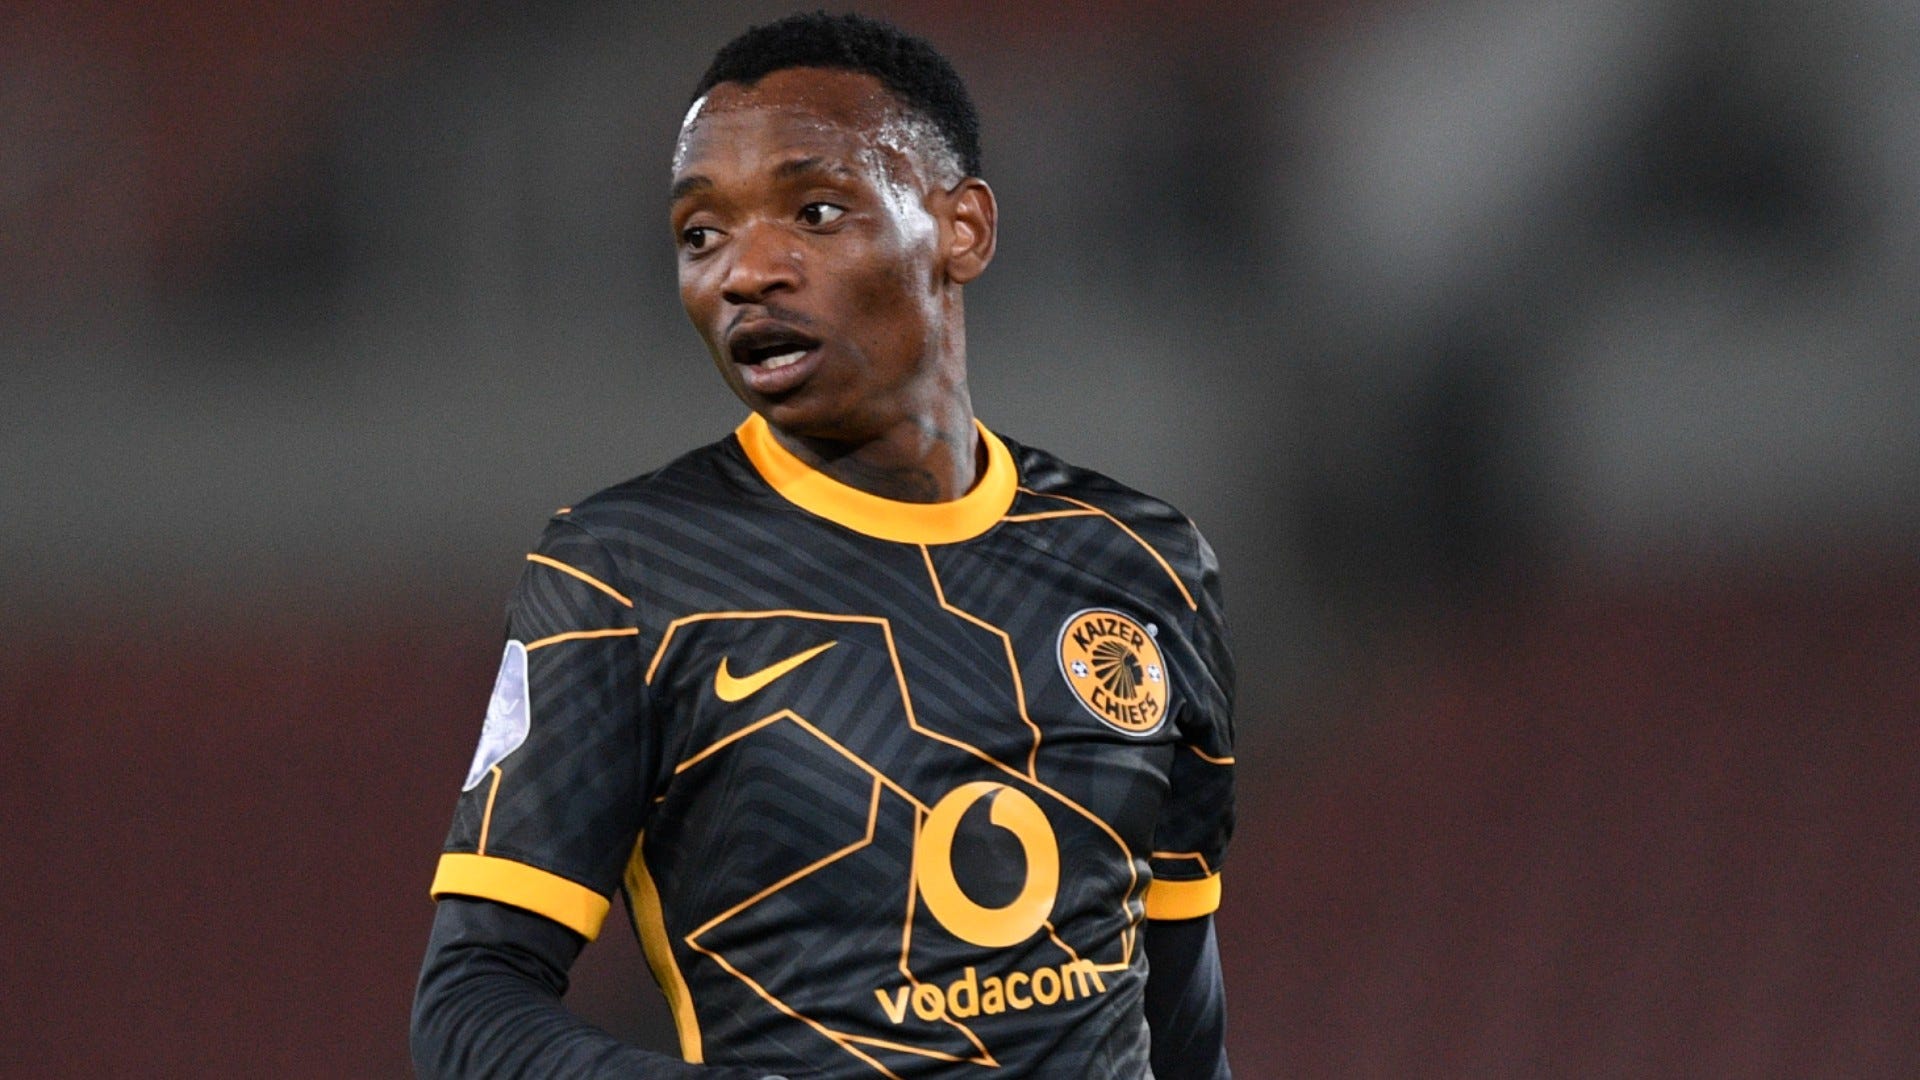  Kaizer Chiefs coach Arthur Zwane is non committal on whether striker Khama Billiat will be at the club beyond his current deal which expires in June WHAT HAPPENED The striker is out for the rest of the season after undergoing surgery on a groin injury which he picked up during the Soweto derby last October The former PSL Player of the Year has had an underwhelming spell at Chiefs since joining in 2018 from Mamelodi Sundowns where he had lit up the PSL A combination of poor form and injuries have conspired to make his stay at Naturena difficult and with his contract set to expire at the end of the season Chiefs look to be exploring their options with the possibility of cutting their ties with him The Zimbabwe international has made nine appearances this season without finding the back of the net in a campaign when Chiefs have been let down by a lack of clinical edge in front of goal With the arrival of 22 year old Congolese forward Christian Saile Basomboli Billiat who turns 33 in August does not represent the future for the Glamour Boys and Zwane seems to think in the same direction WHAT DID HE SAY Look everything boils down to one thing profiling players the plan for next season Zwane said on Monday as quoted by Soccer Laduma I am not going to say who is going to be part of the team next season or who is not going to be part of the team We don t know as we stand only time will tell Khama is a big boy he understands that things do happen in football Some of the things are beyond our control We re just hoping that things will change for the better We have been encouraging him but not only him Eric Mathoho has been in a similar situation where he has been battling with injuries Phathutshedzo Nange Cole Alexander they are going through it and they are dealing with it because the team is also offering help psychologically THE BIGGER PICTURE Billiat has scored 24 goals and provided 29 assists in 125 PSL matches for Amakhosi with last season being his most productive campaign for the Soweto giants when he scored eight and set up as many in 27 games He has however failed to sparkle in 2022 23 and with Zwane s side finding goals hard to come by it looks like the club will be looking elsewhere for solutions at the end of the season WHAT S NEXT Chiefs face Maritzburg United in the Nedbank Cup on Friday with Zwane hoping that his side can find the target after their toothless display against TS Galaxy on Sunday Credit goal com You can read the original article here  